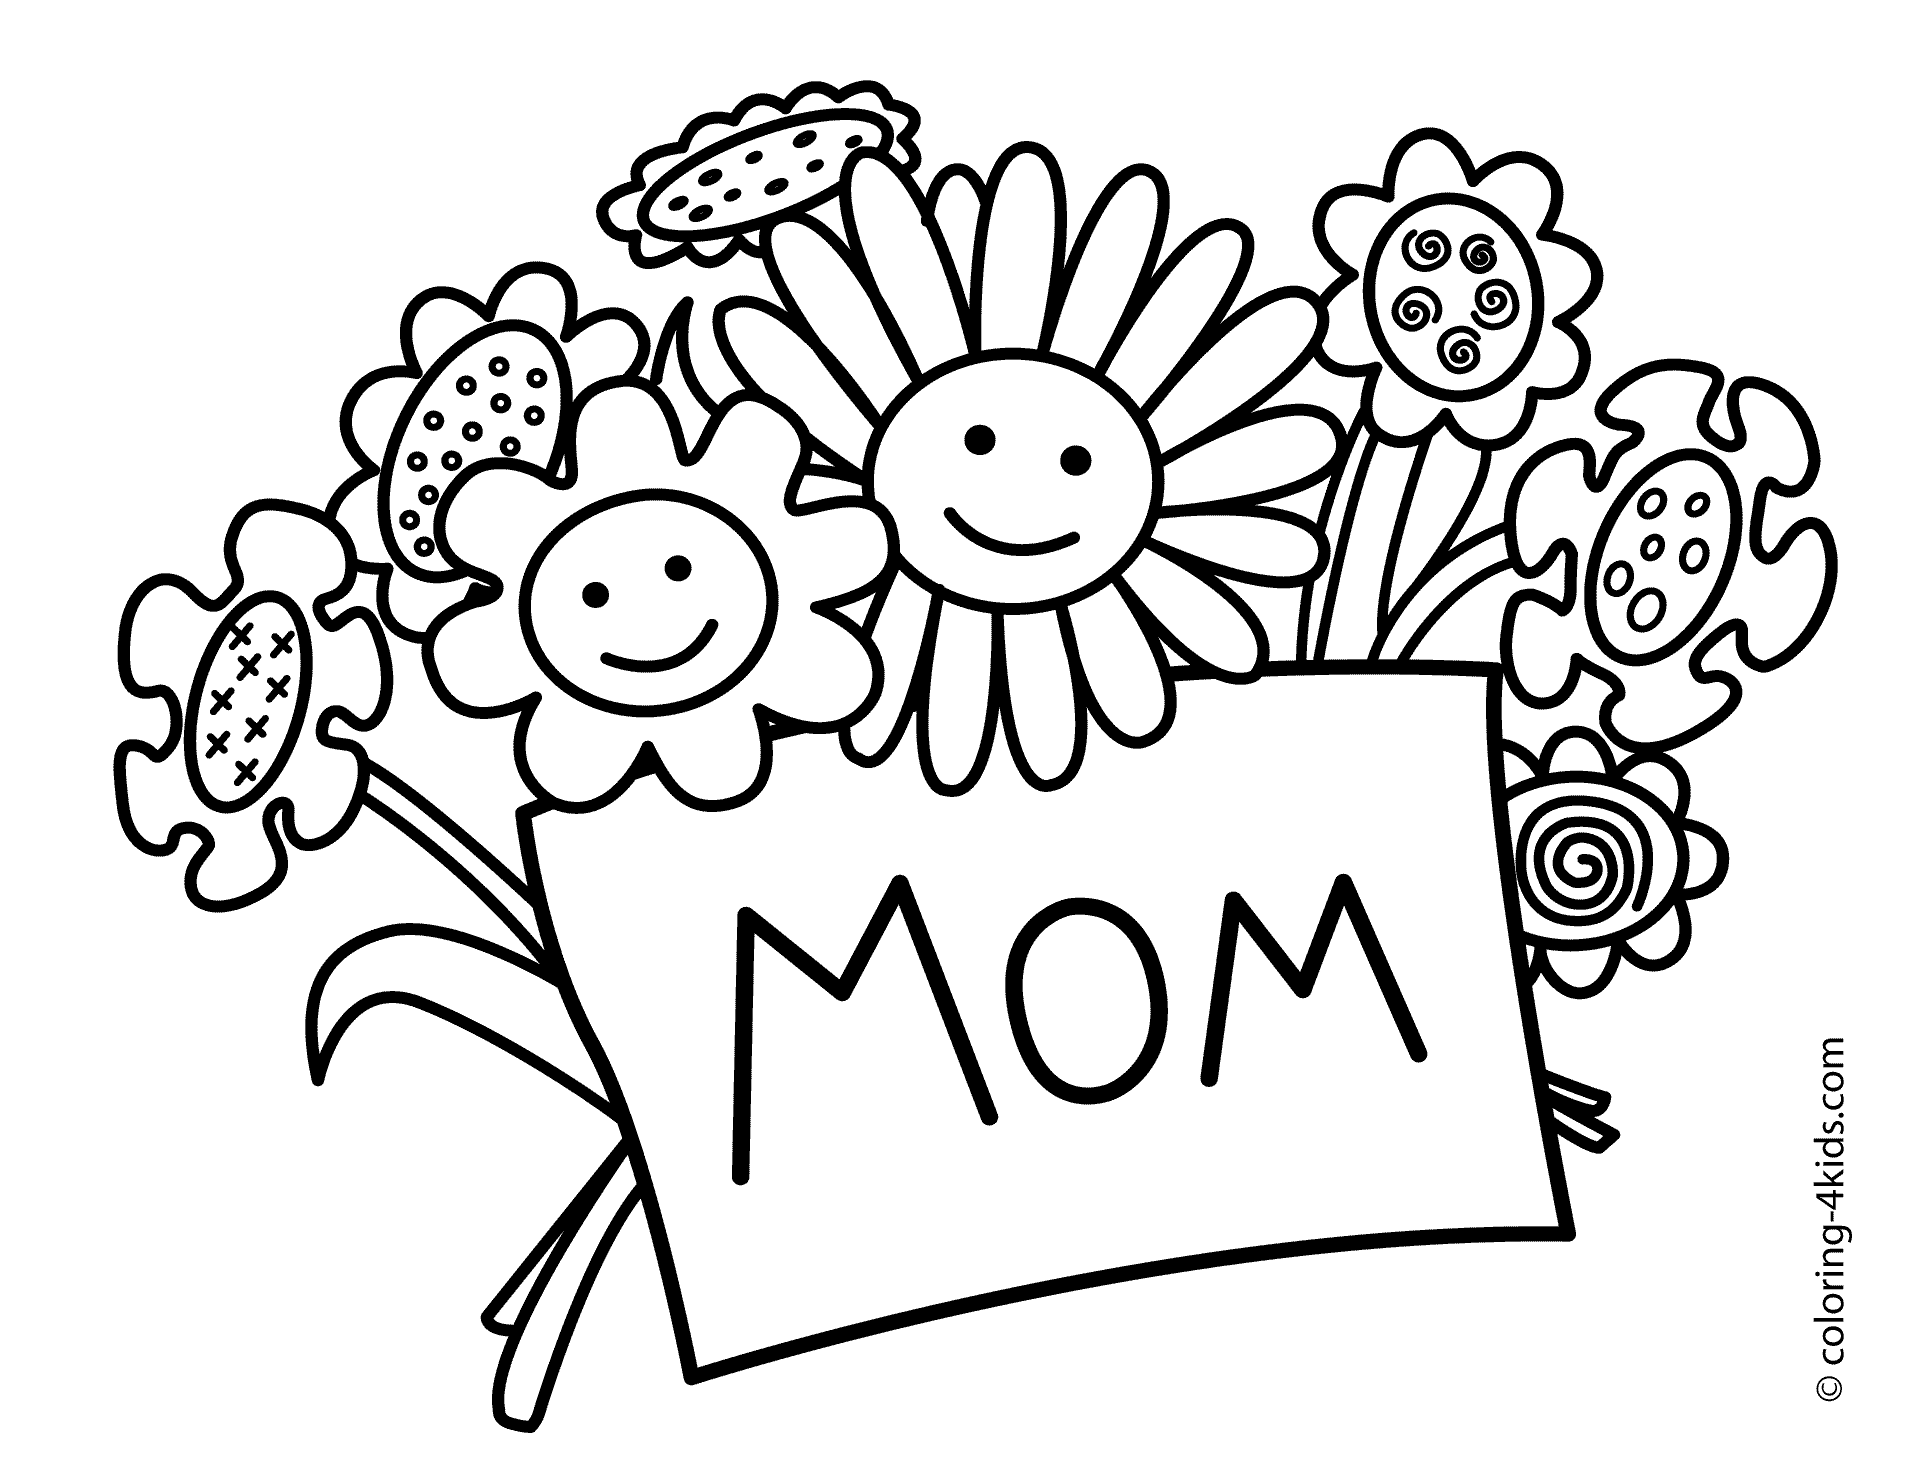 Mothers Day Coloring Pages - Happy Festivals 2016, Wallpapers ...